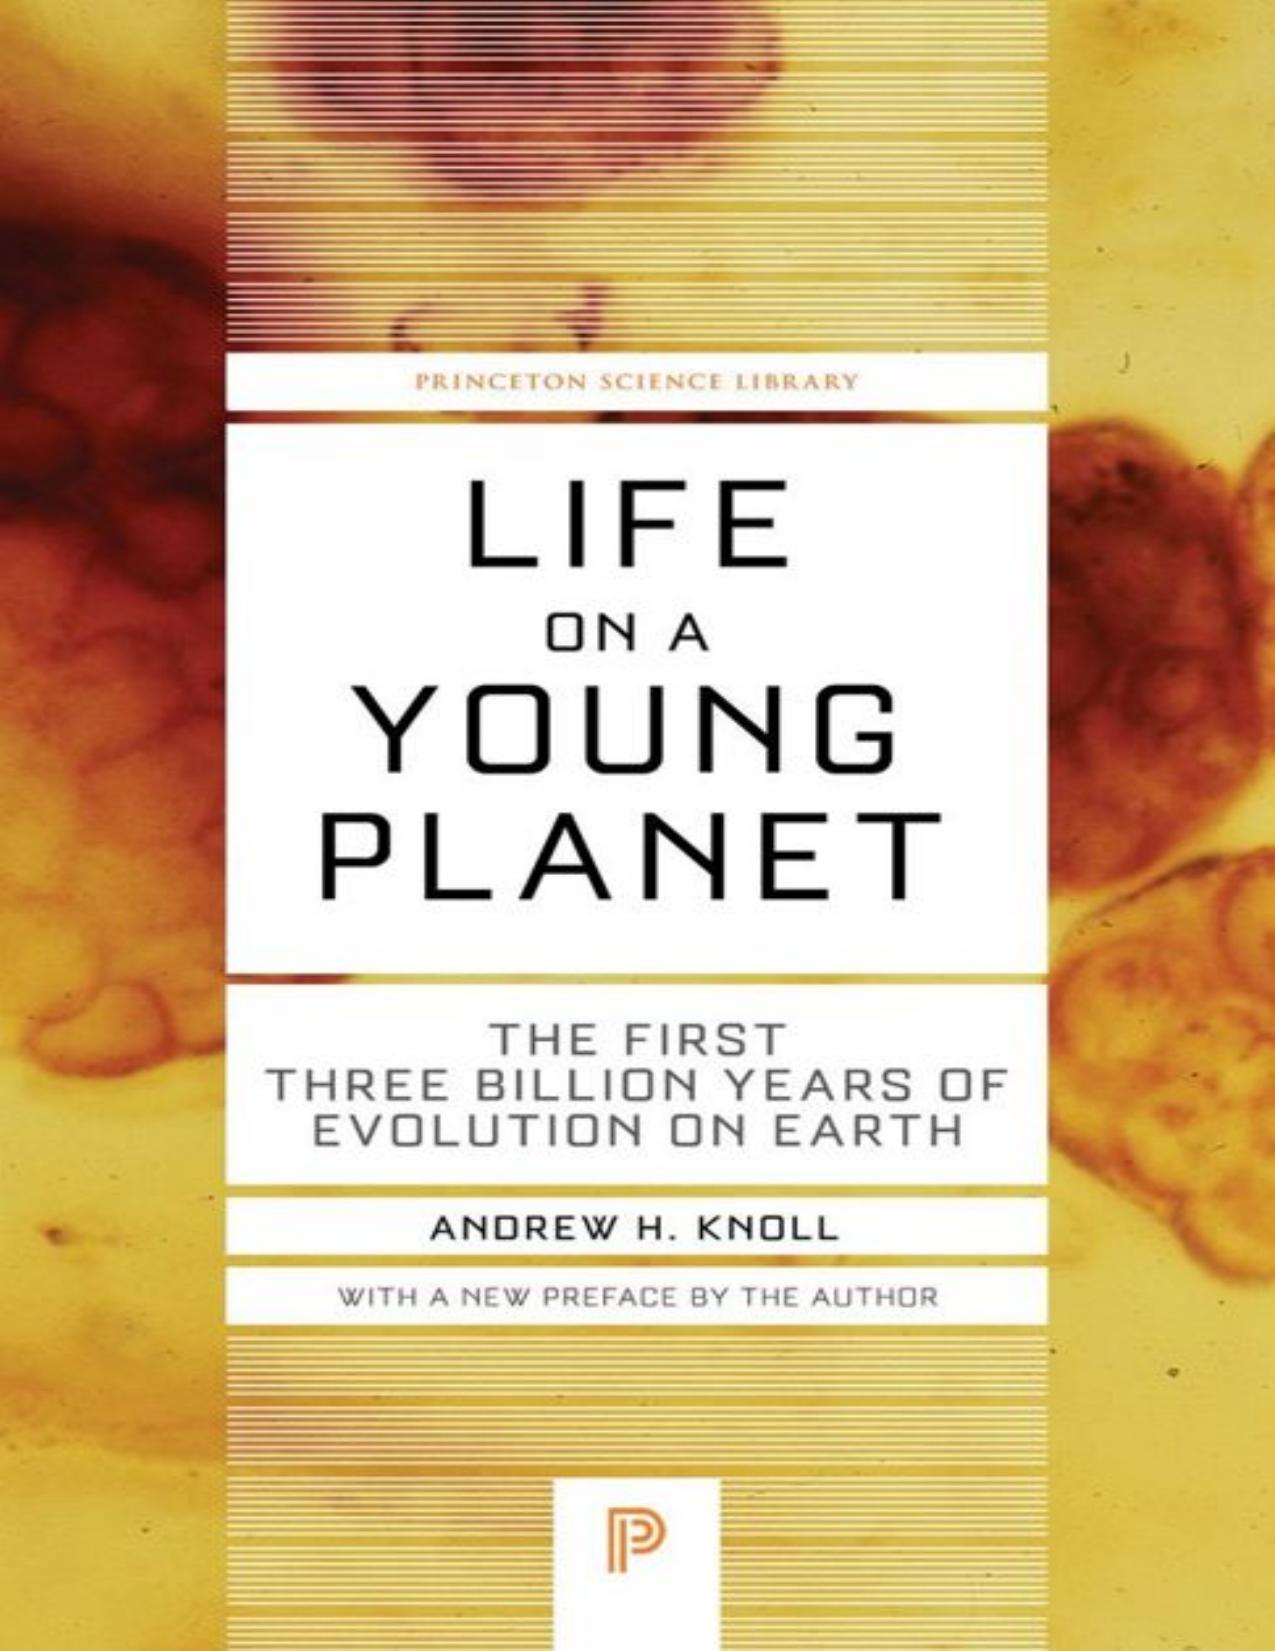 Life on a Young Planet: The First Three Billion Years of Evolution on Earth: The First Three Billion Years of Evolution on Earth (Princeton Science Library)